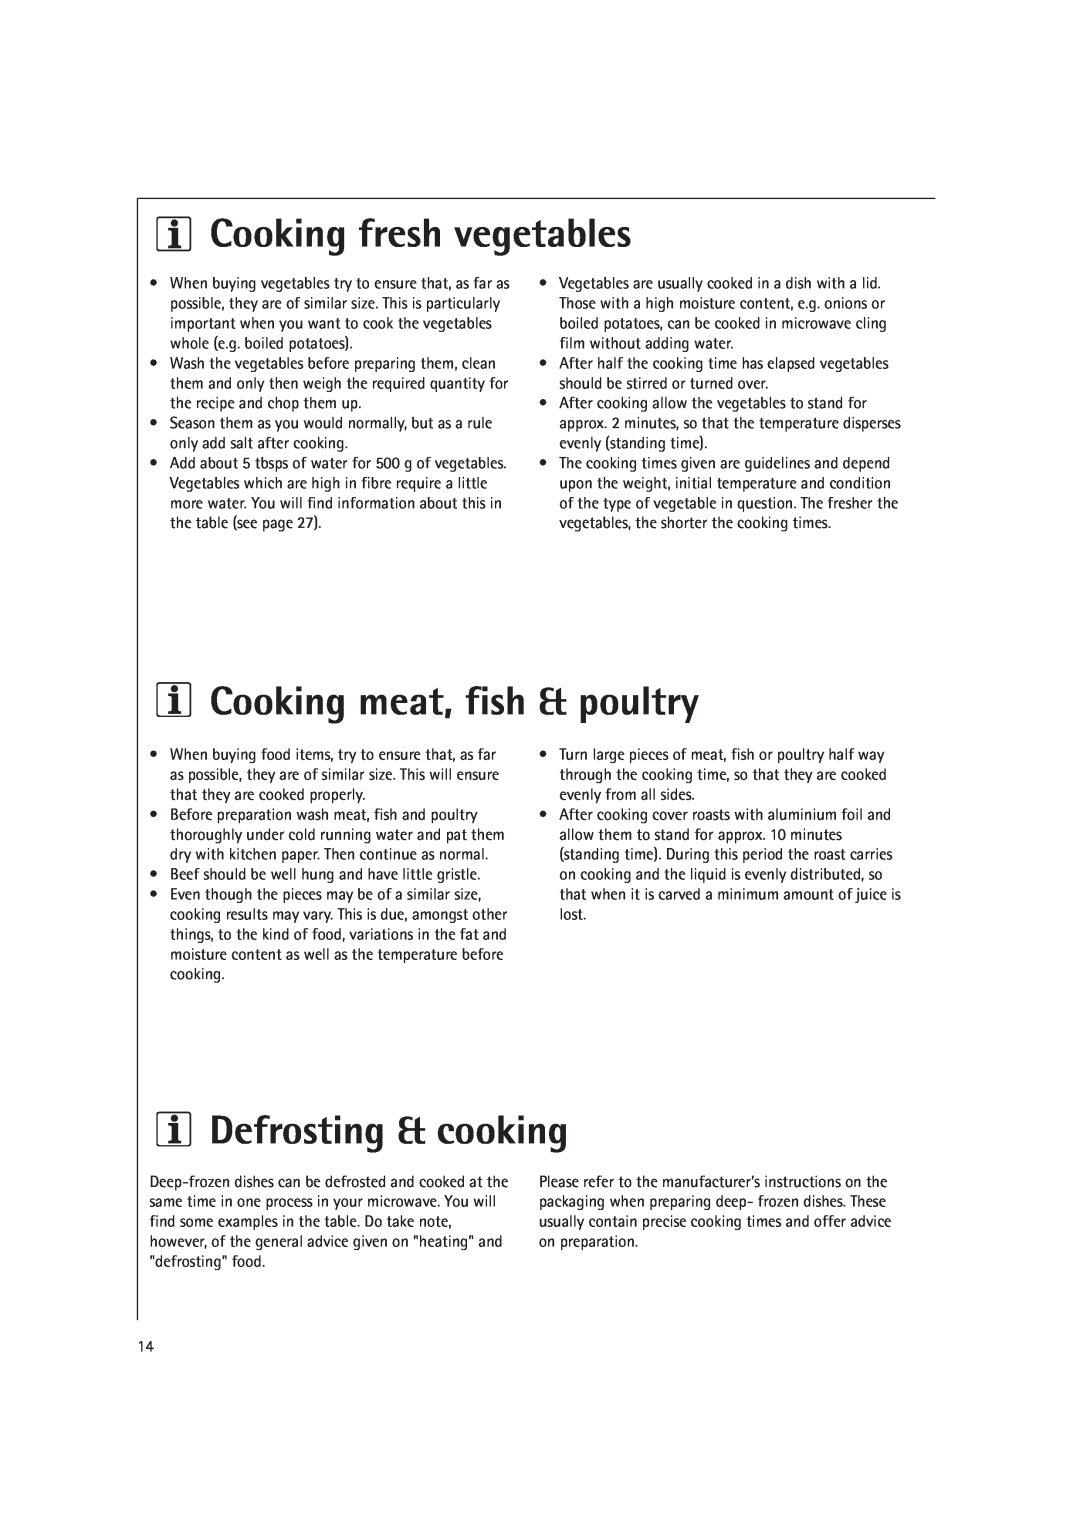 AEG MCD2661E, MCD2660E operating instructions Cooking fresh vegetables, Cooking meat, fish & poultry, Defrosting & cooking 